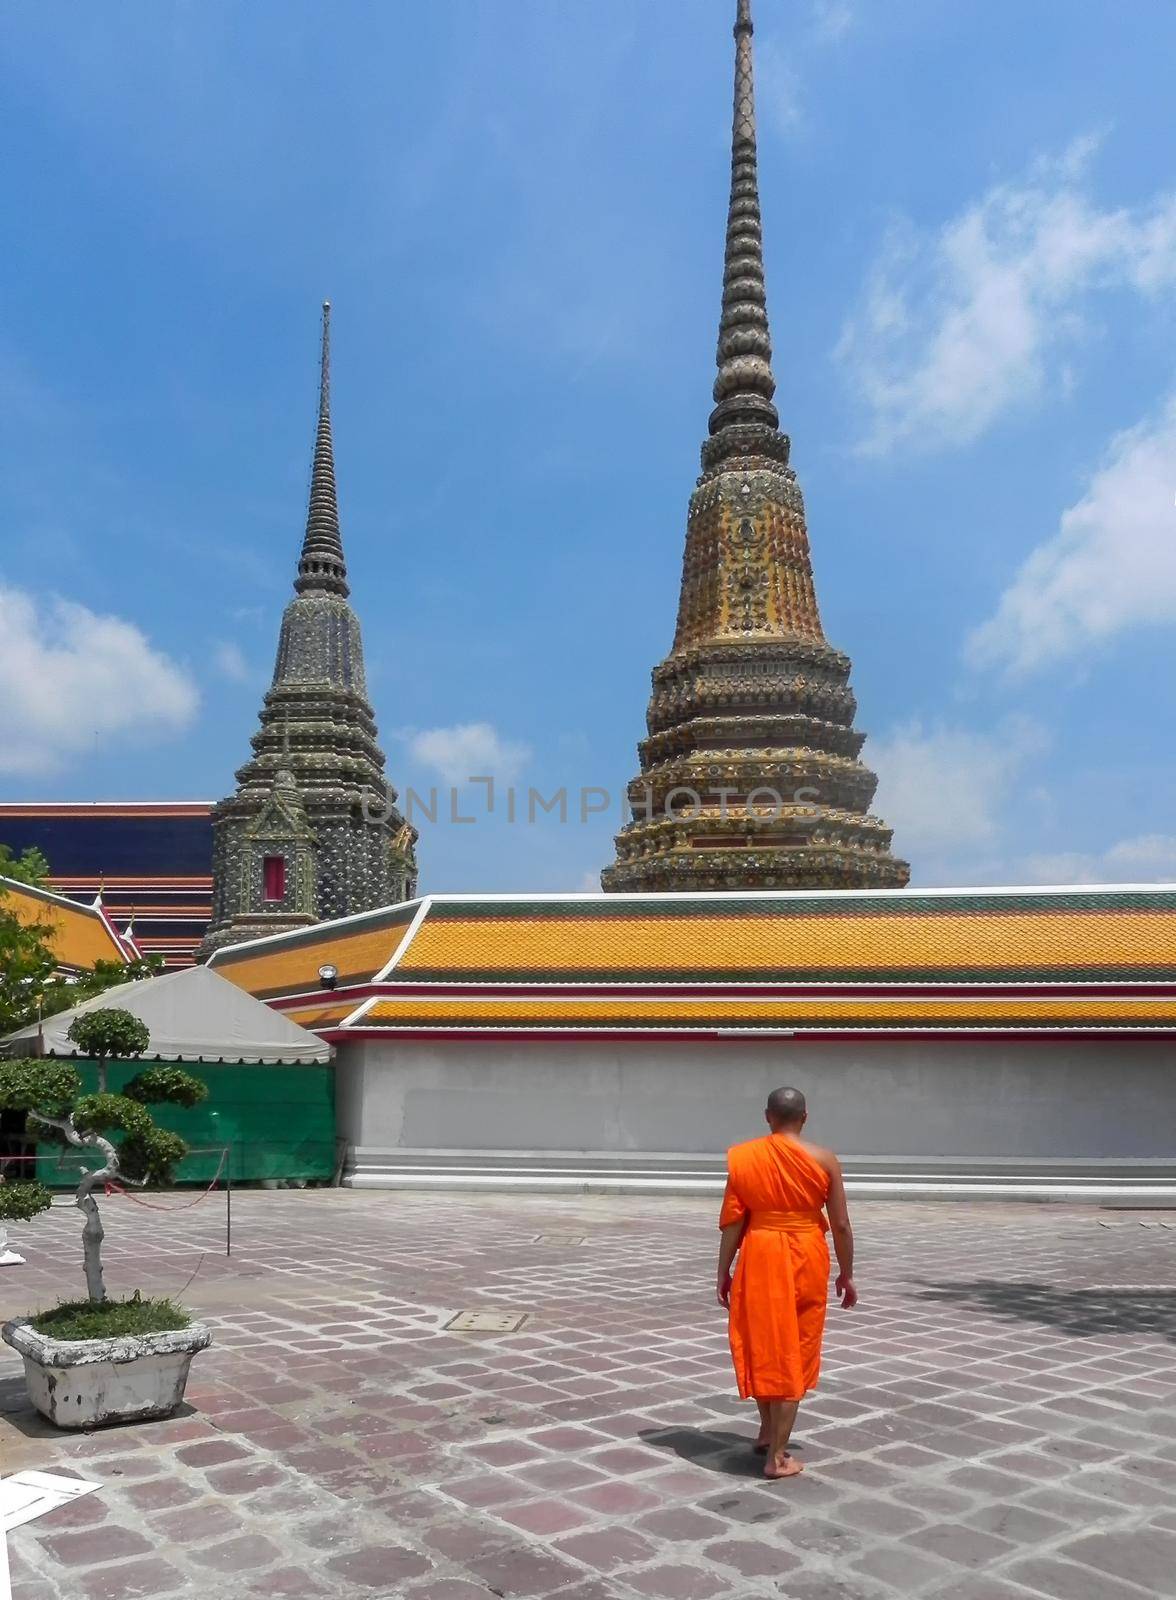 Buddhist monk at the temple of Wat Pho in Bangkok by Andre1ns